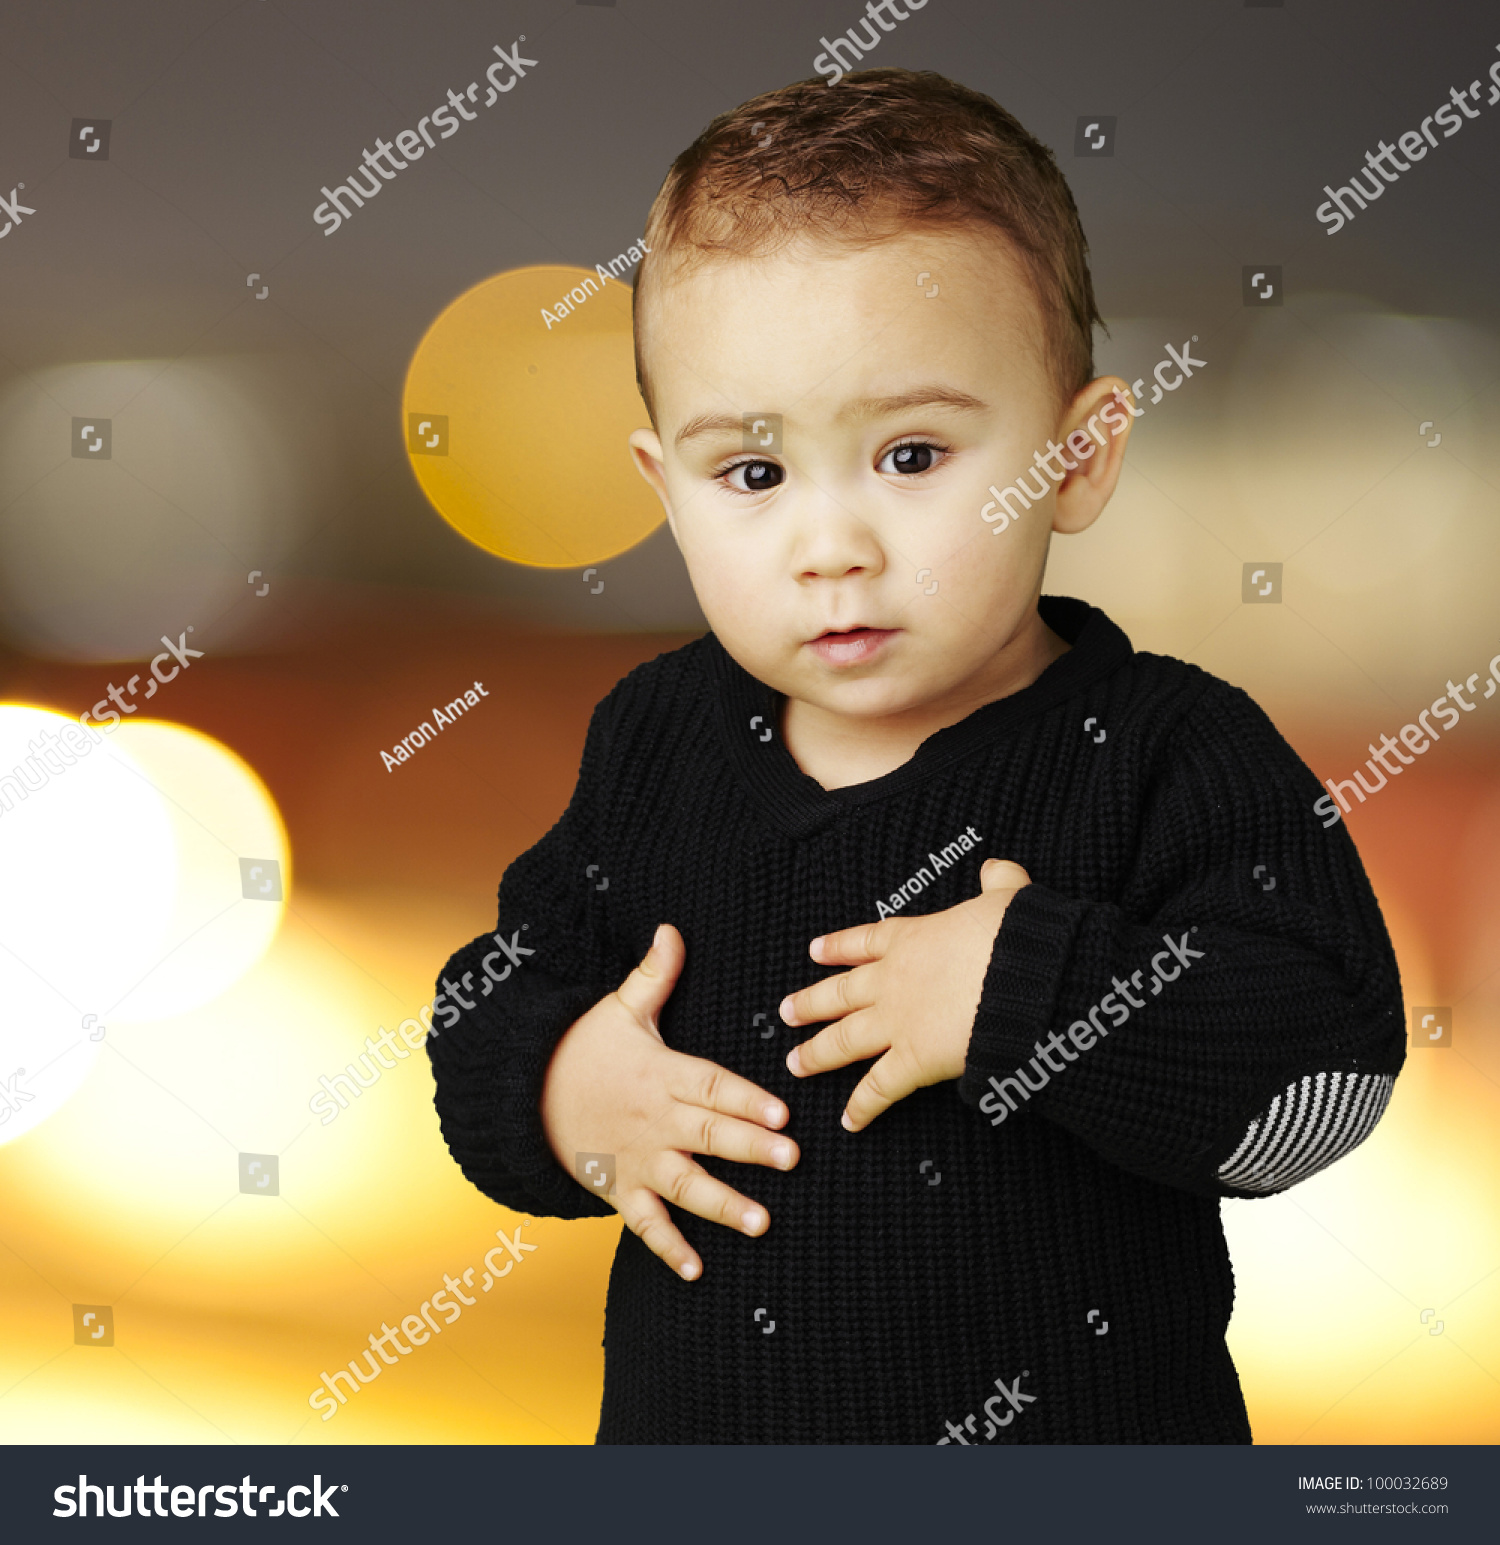 Portrait Of An Adorable Kid Touching His Stomach At A City By Night ...